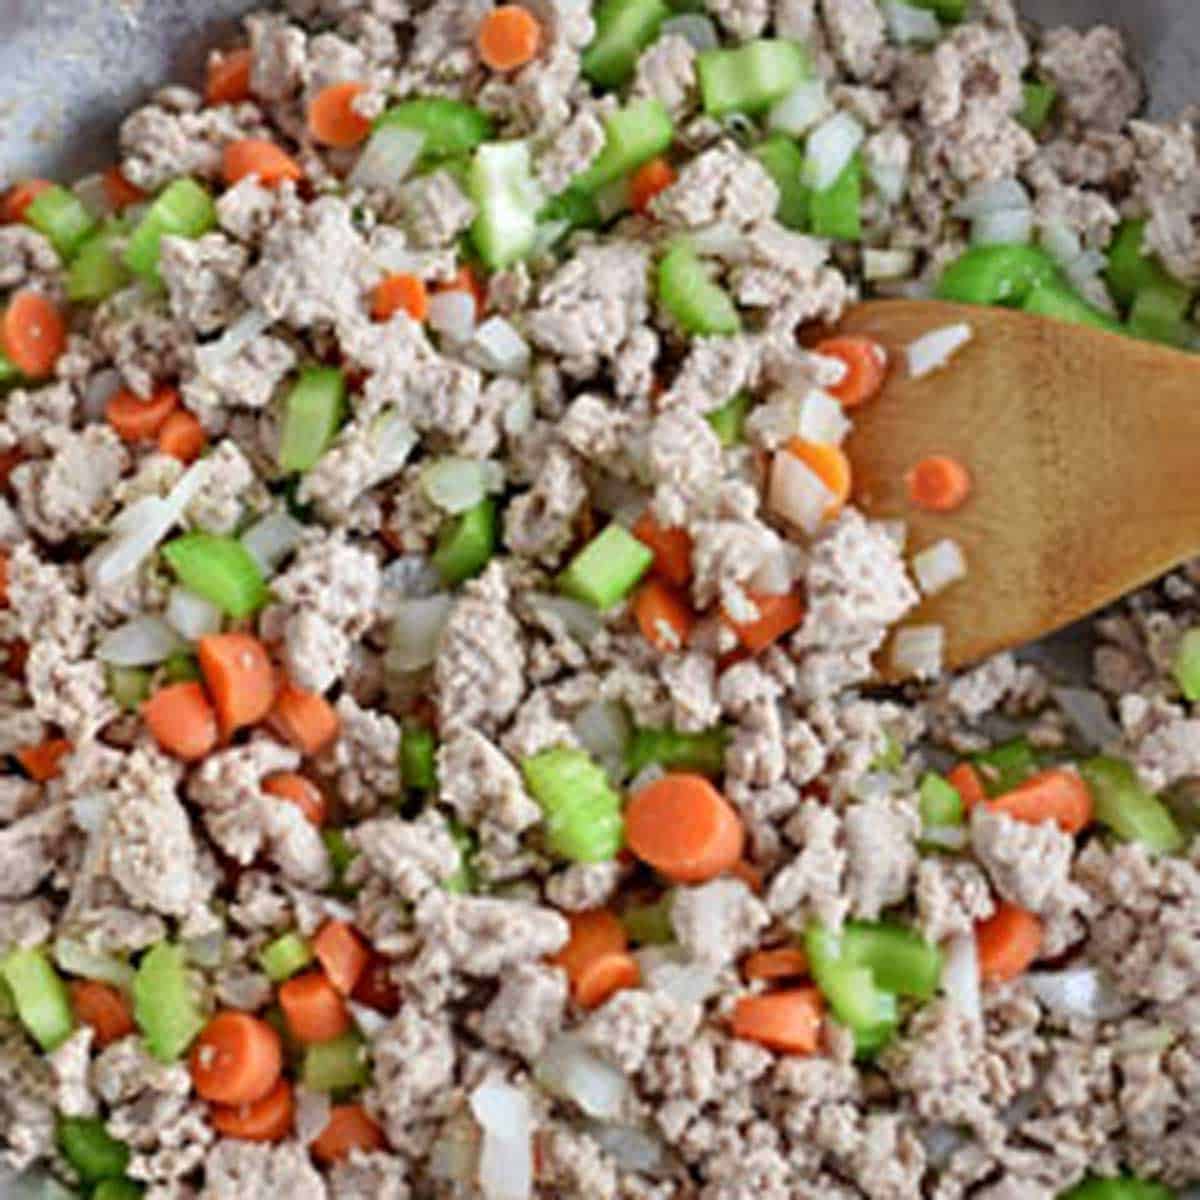 A large skillet filled with cooked ground turkey, diced onions, celery, and carrots.